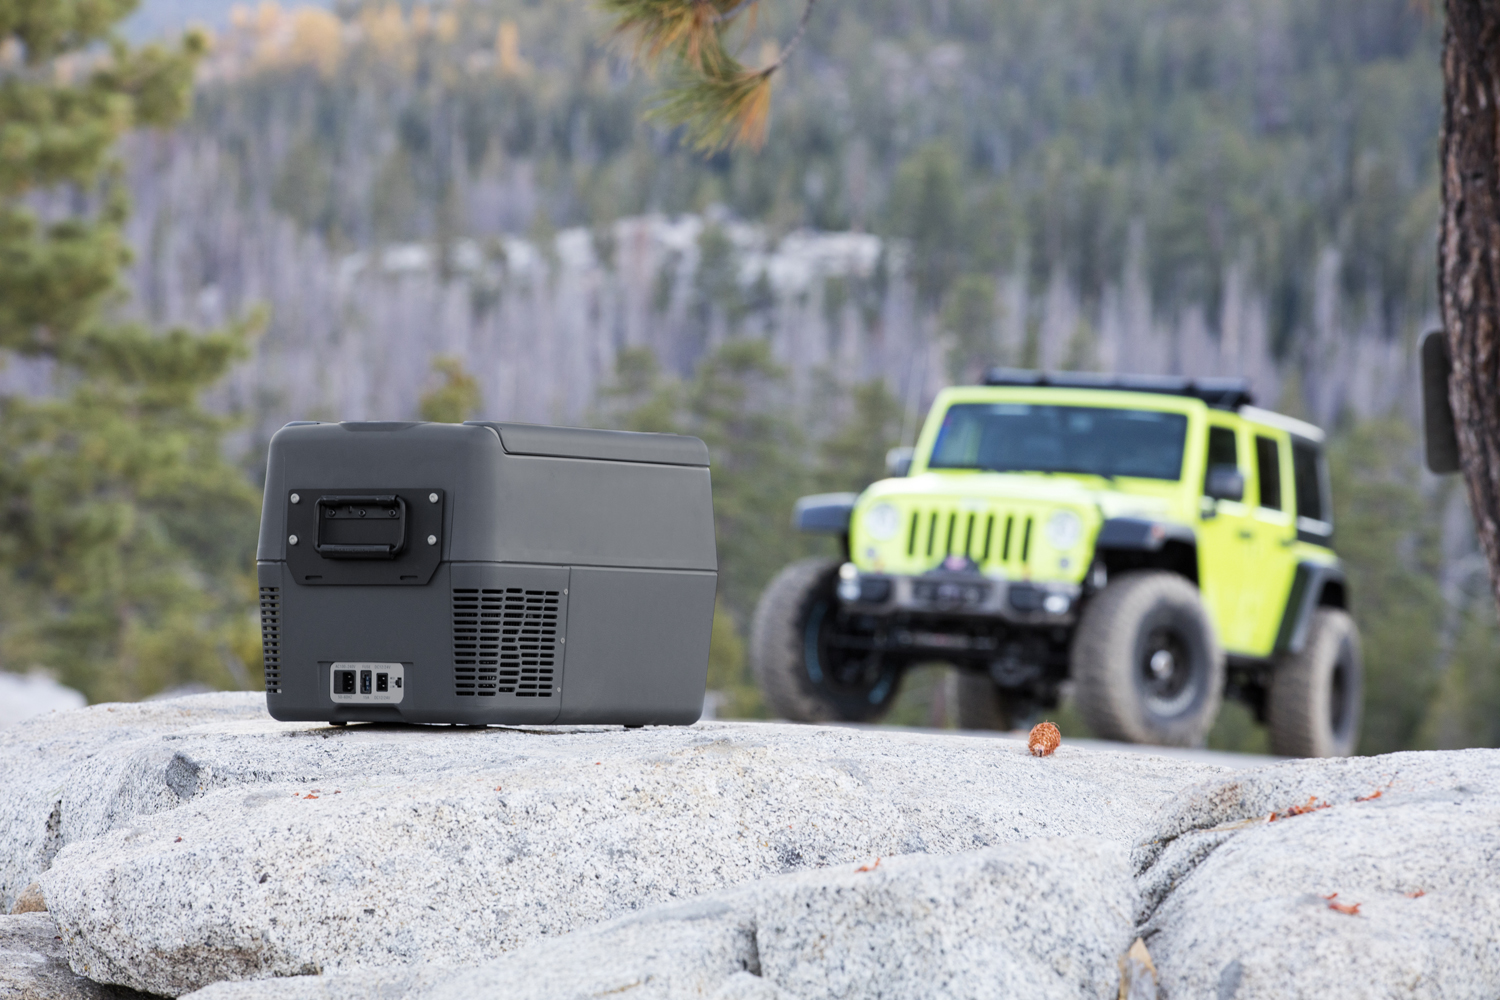 Webasto’s new Fridge Freezer 31 is designed for Jeep Wrangler owners who want the convenience of a mobile refrigerator and freezer.